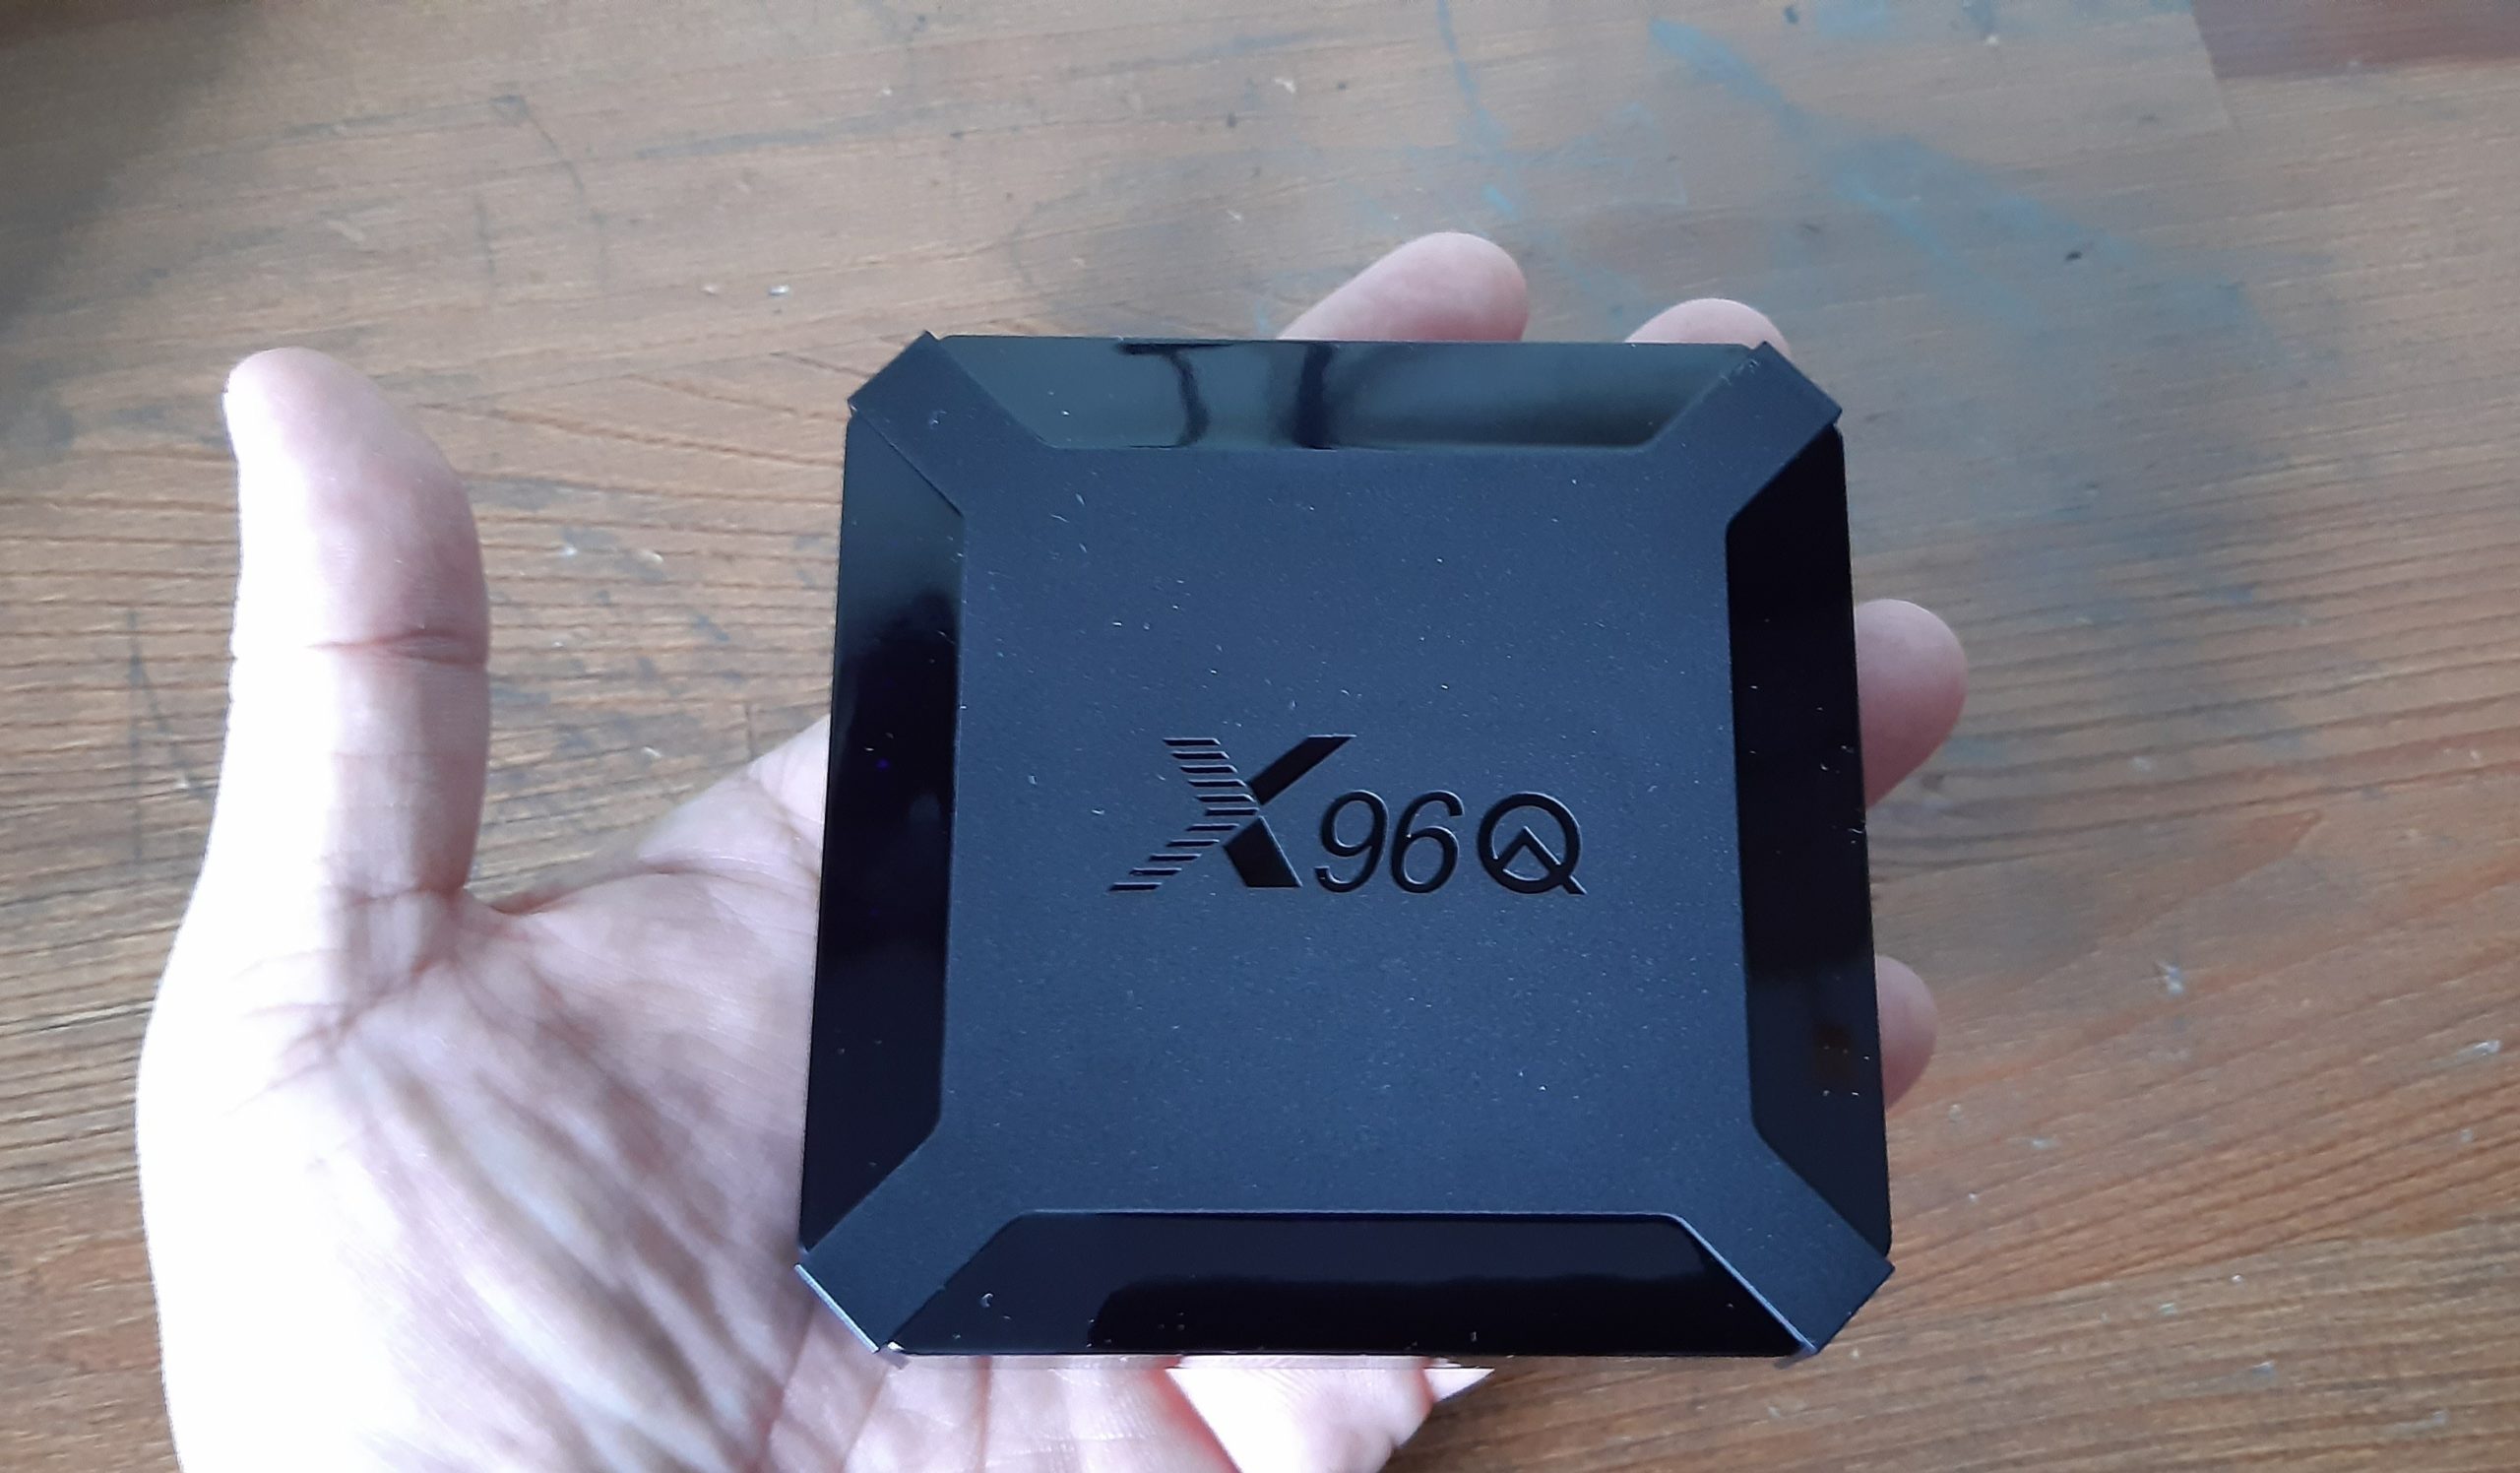 X96Q TV BOX Review - Is It Worth Buying In 2021